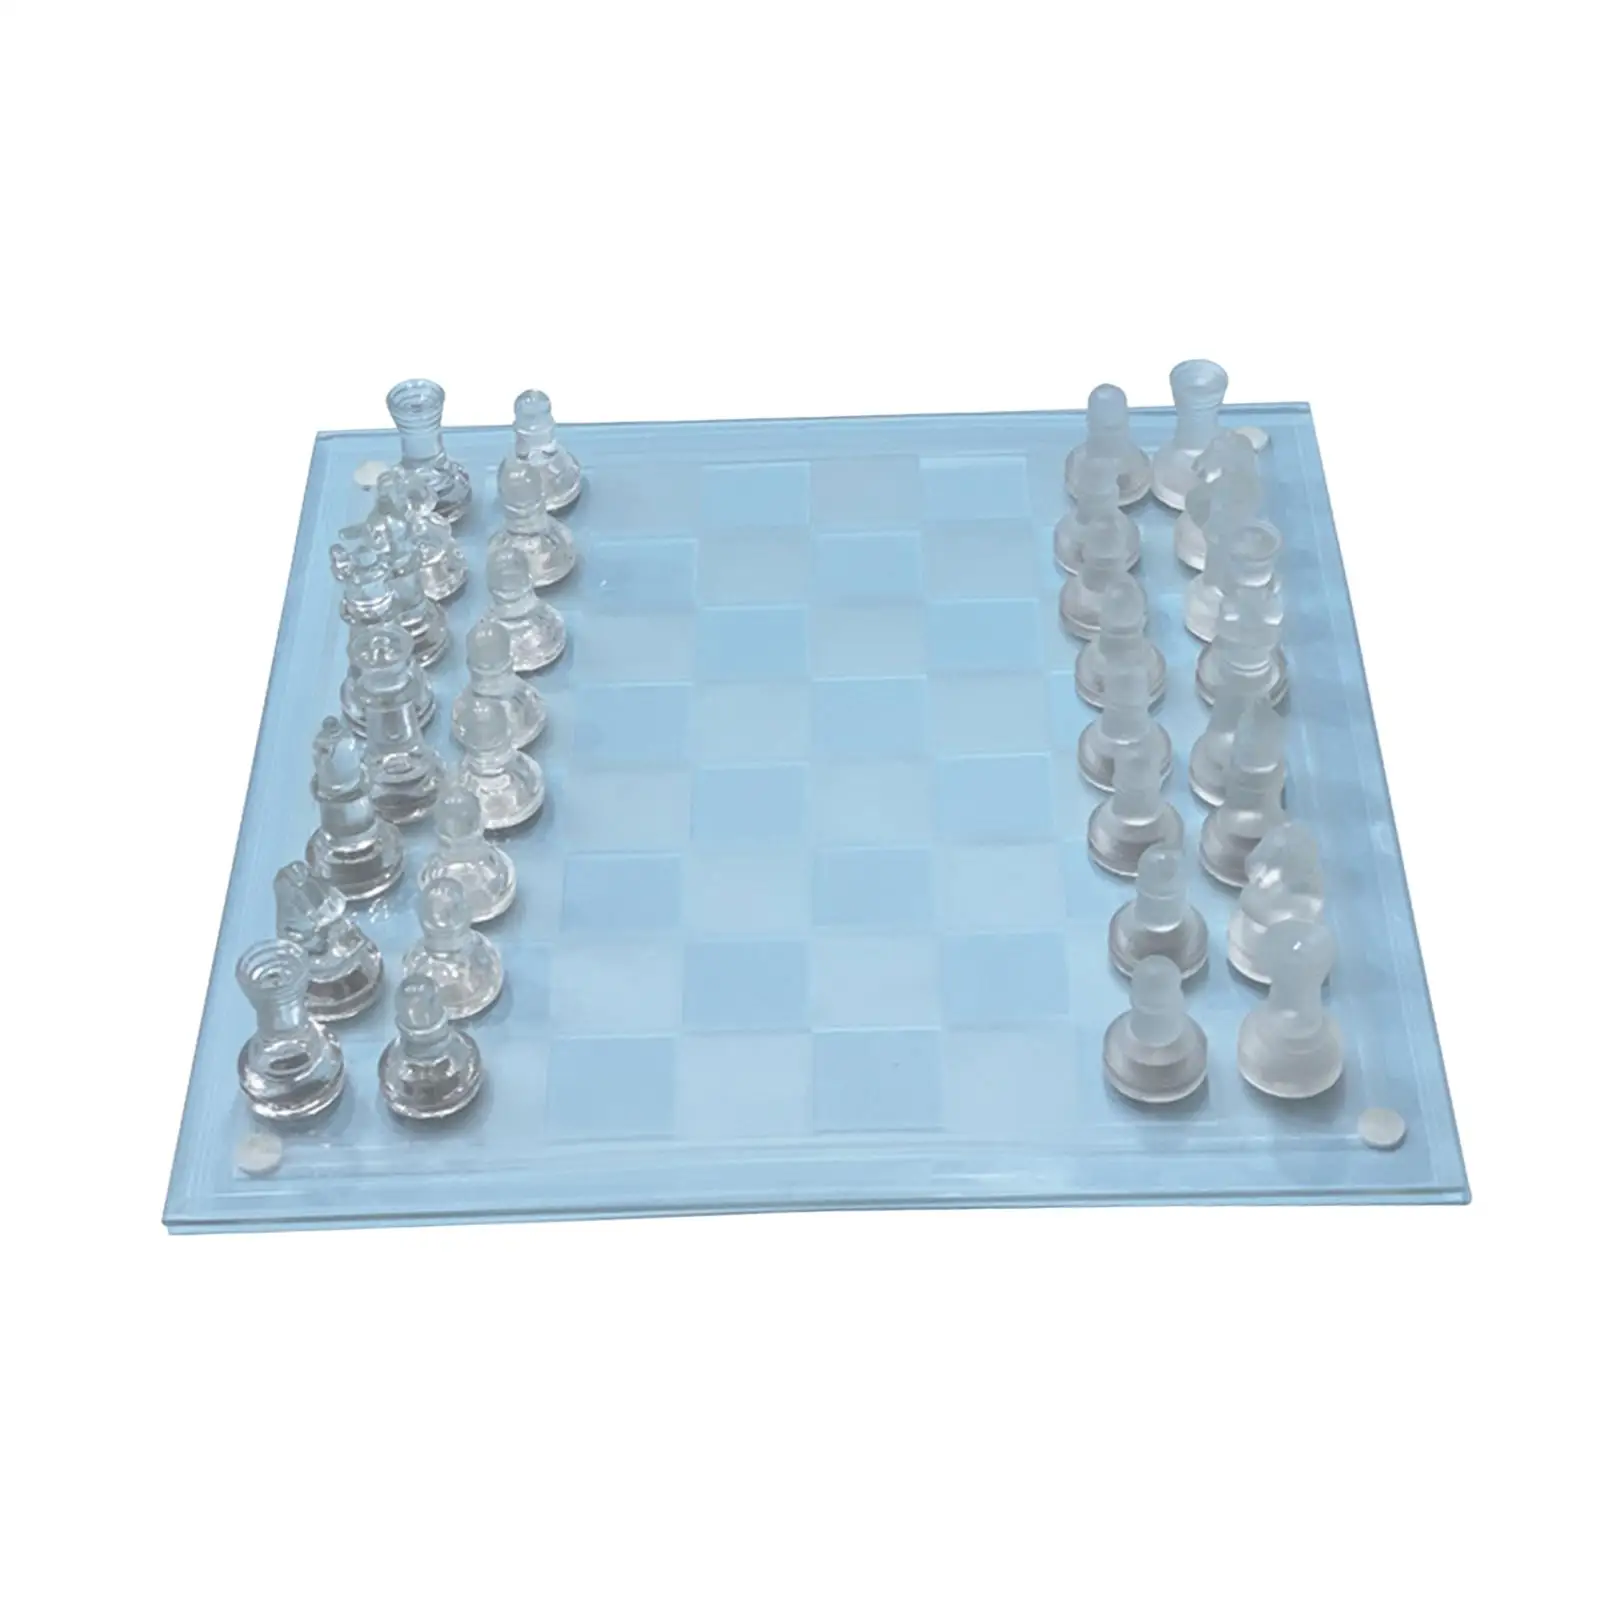 Classic Strategy Game Portable Early Education Frosted Chess Set Chess Set for Adult for Game Leisure Camping Trips Interaction